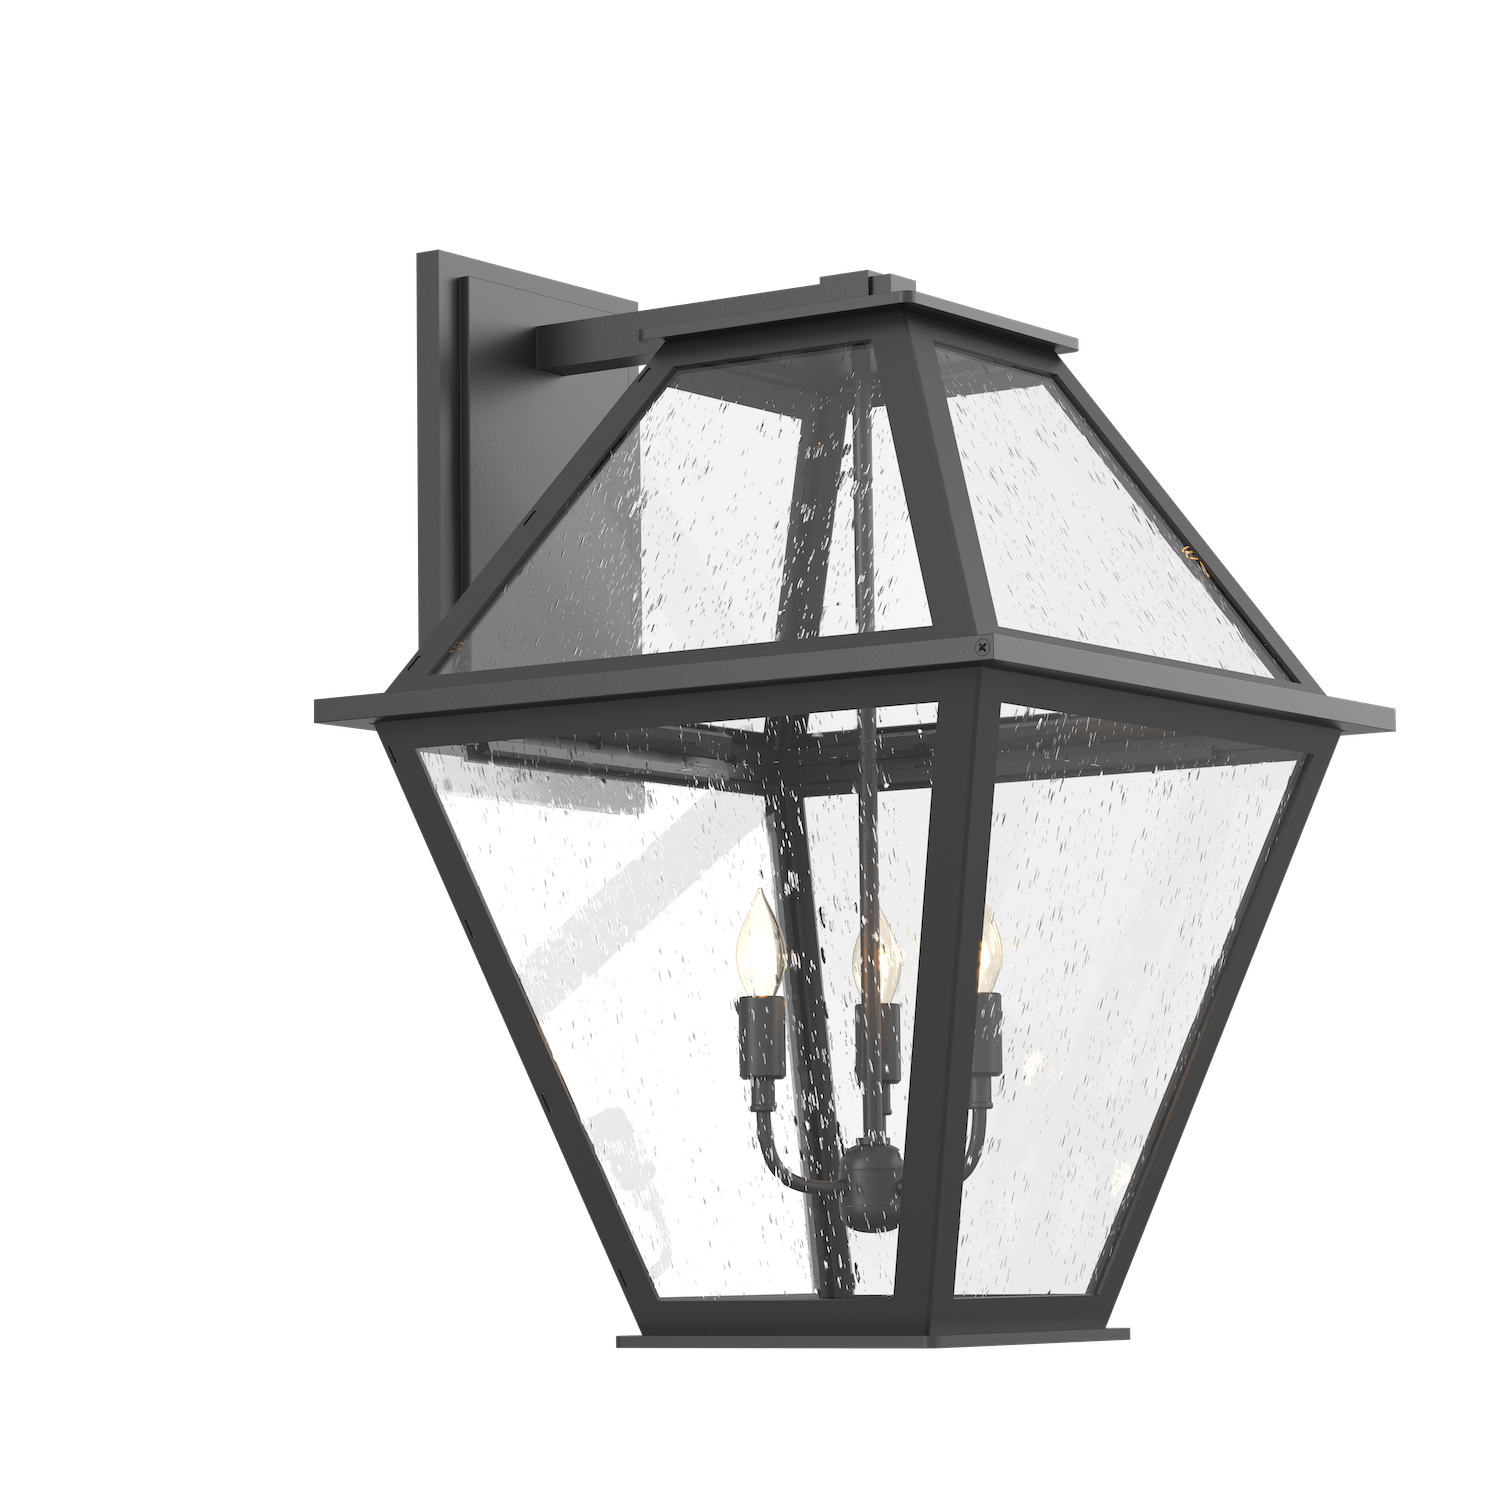 ODB0072-01-AG-CS-Hammerton-Studio-Terrace-24-inch-outdoor-candelabra-lantern-with-argento-grey-finish-and-clear-glass-shade-and-incandescent-lamping